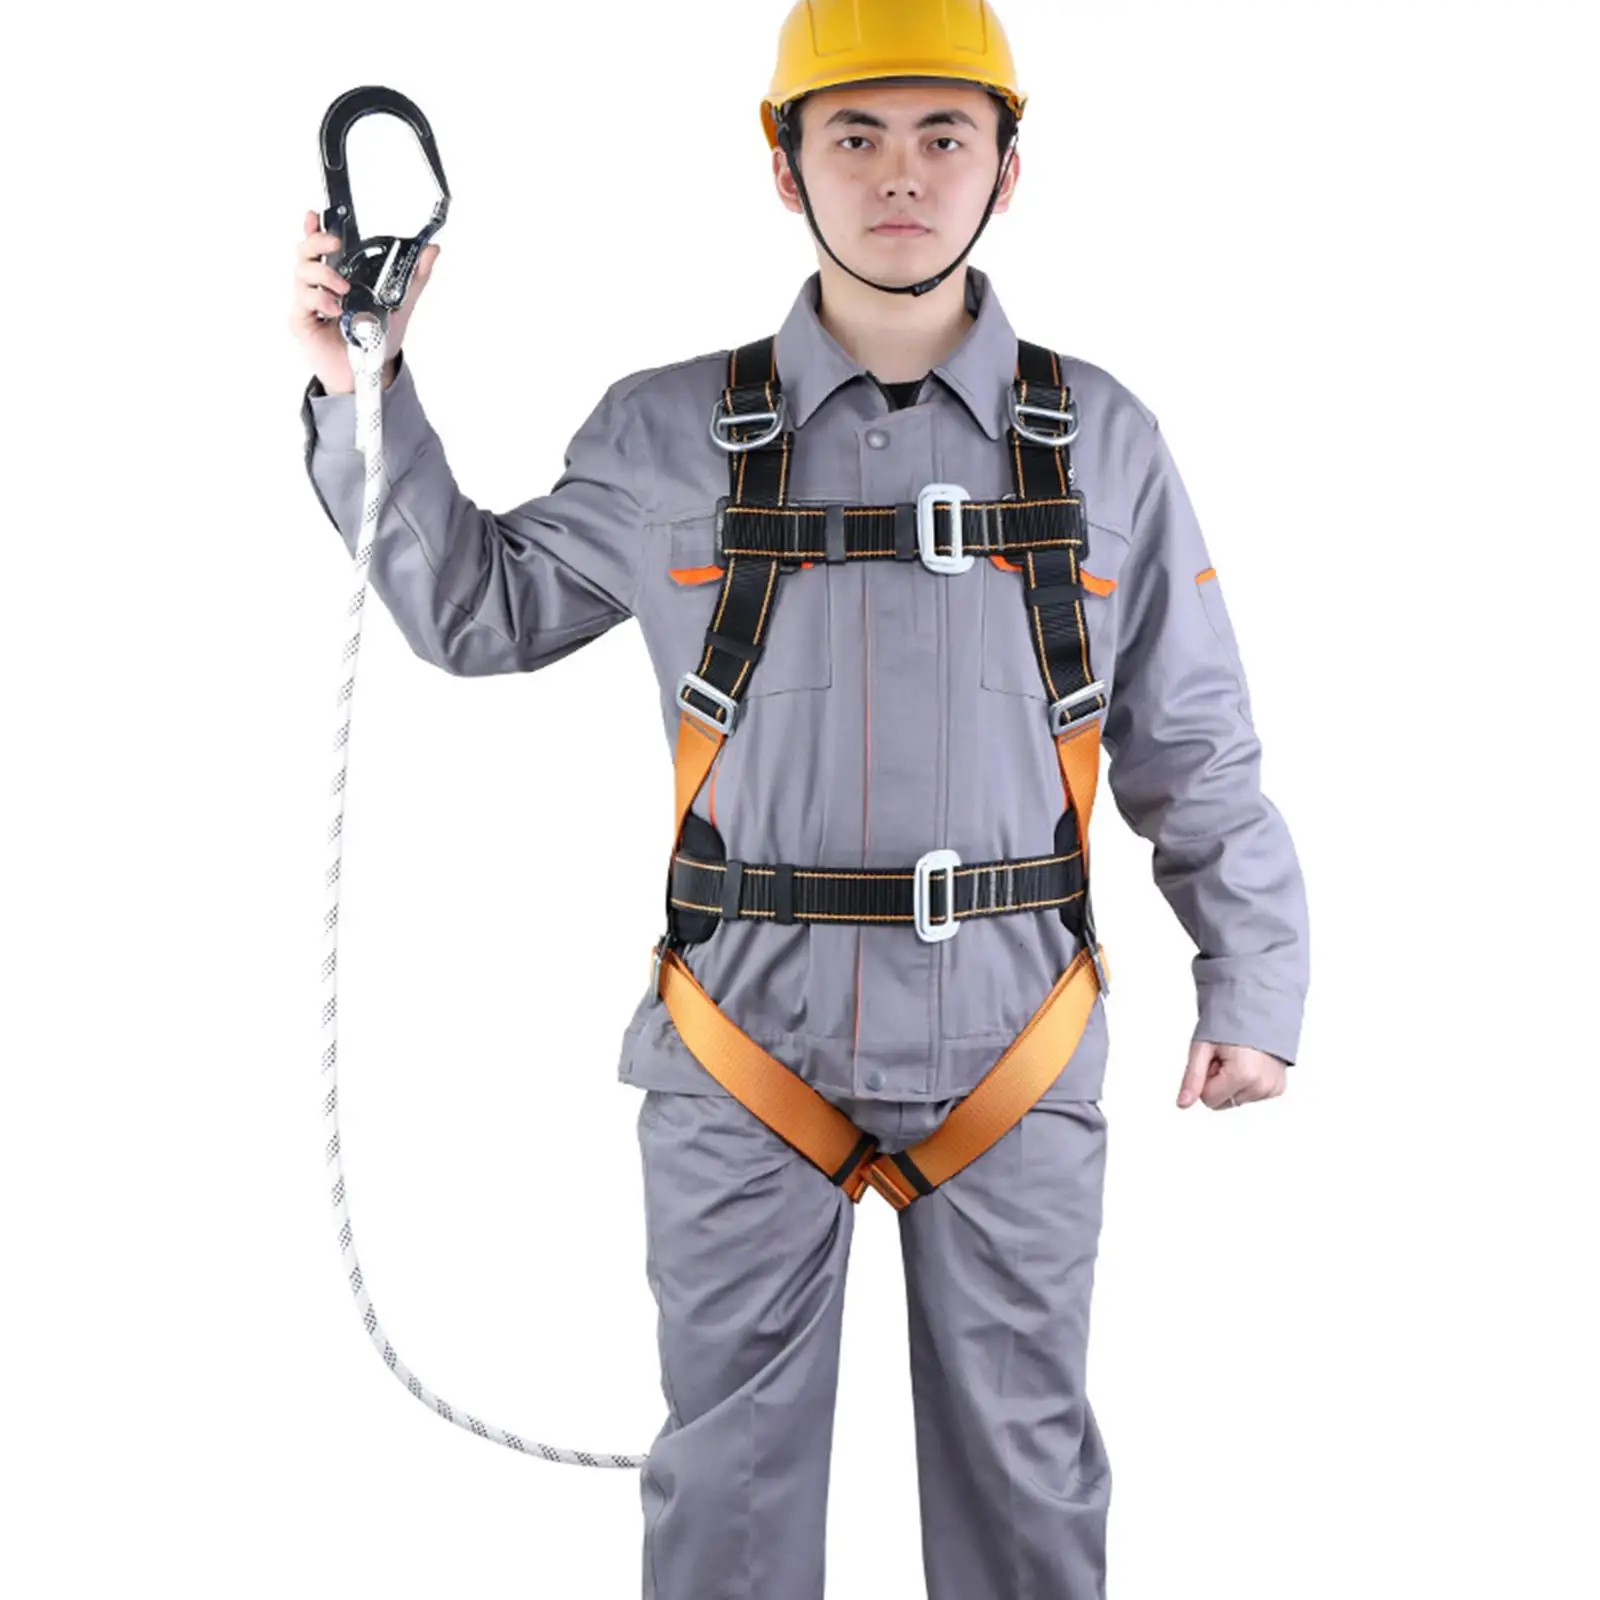 Climbing Harness Safety Belt Rock Climbing Fall Protection for Fire Rescuing